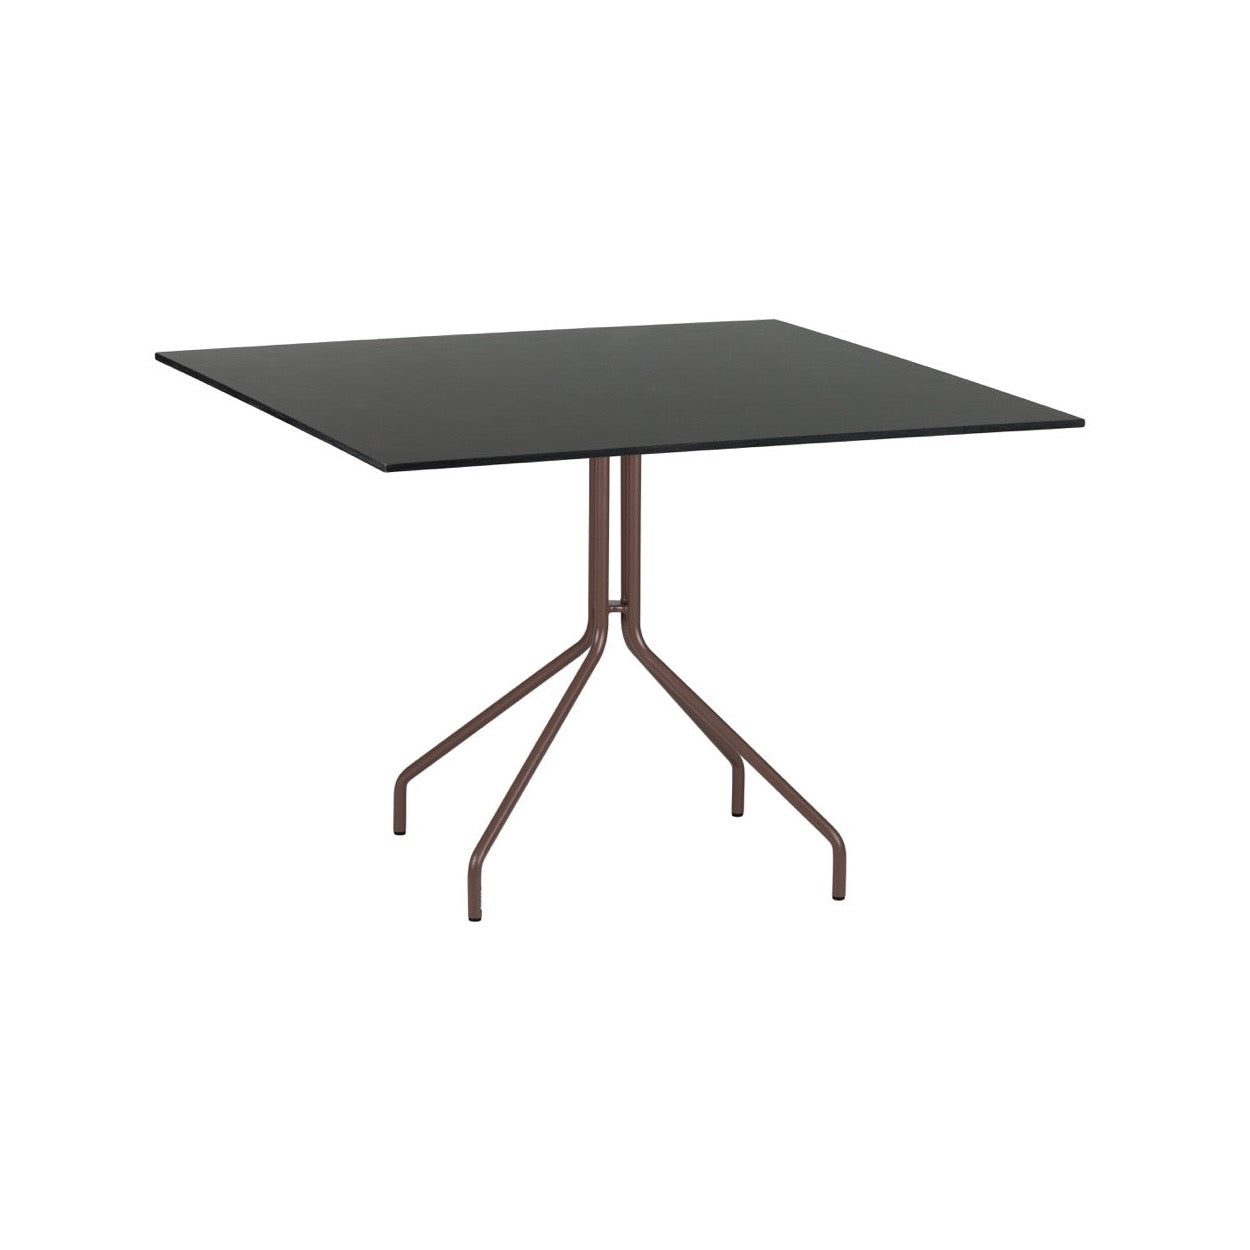 Weave dining table 90 cm